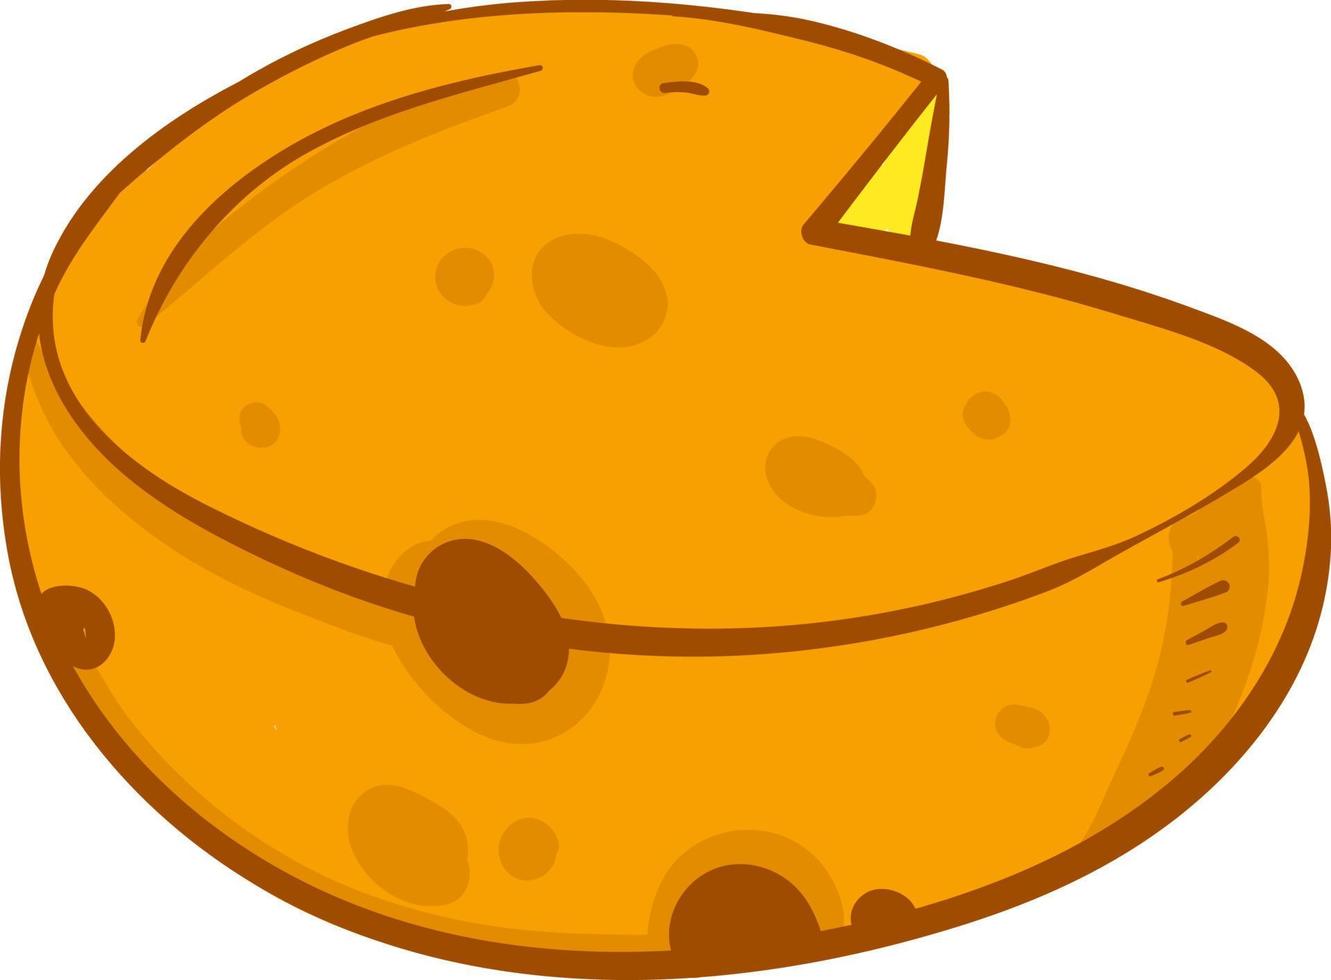 Round cheese, illustration, vector on a white background.